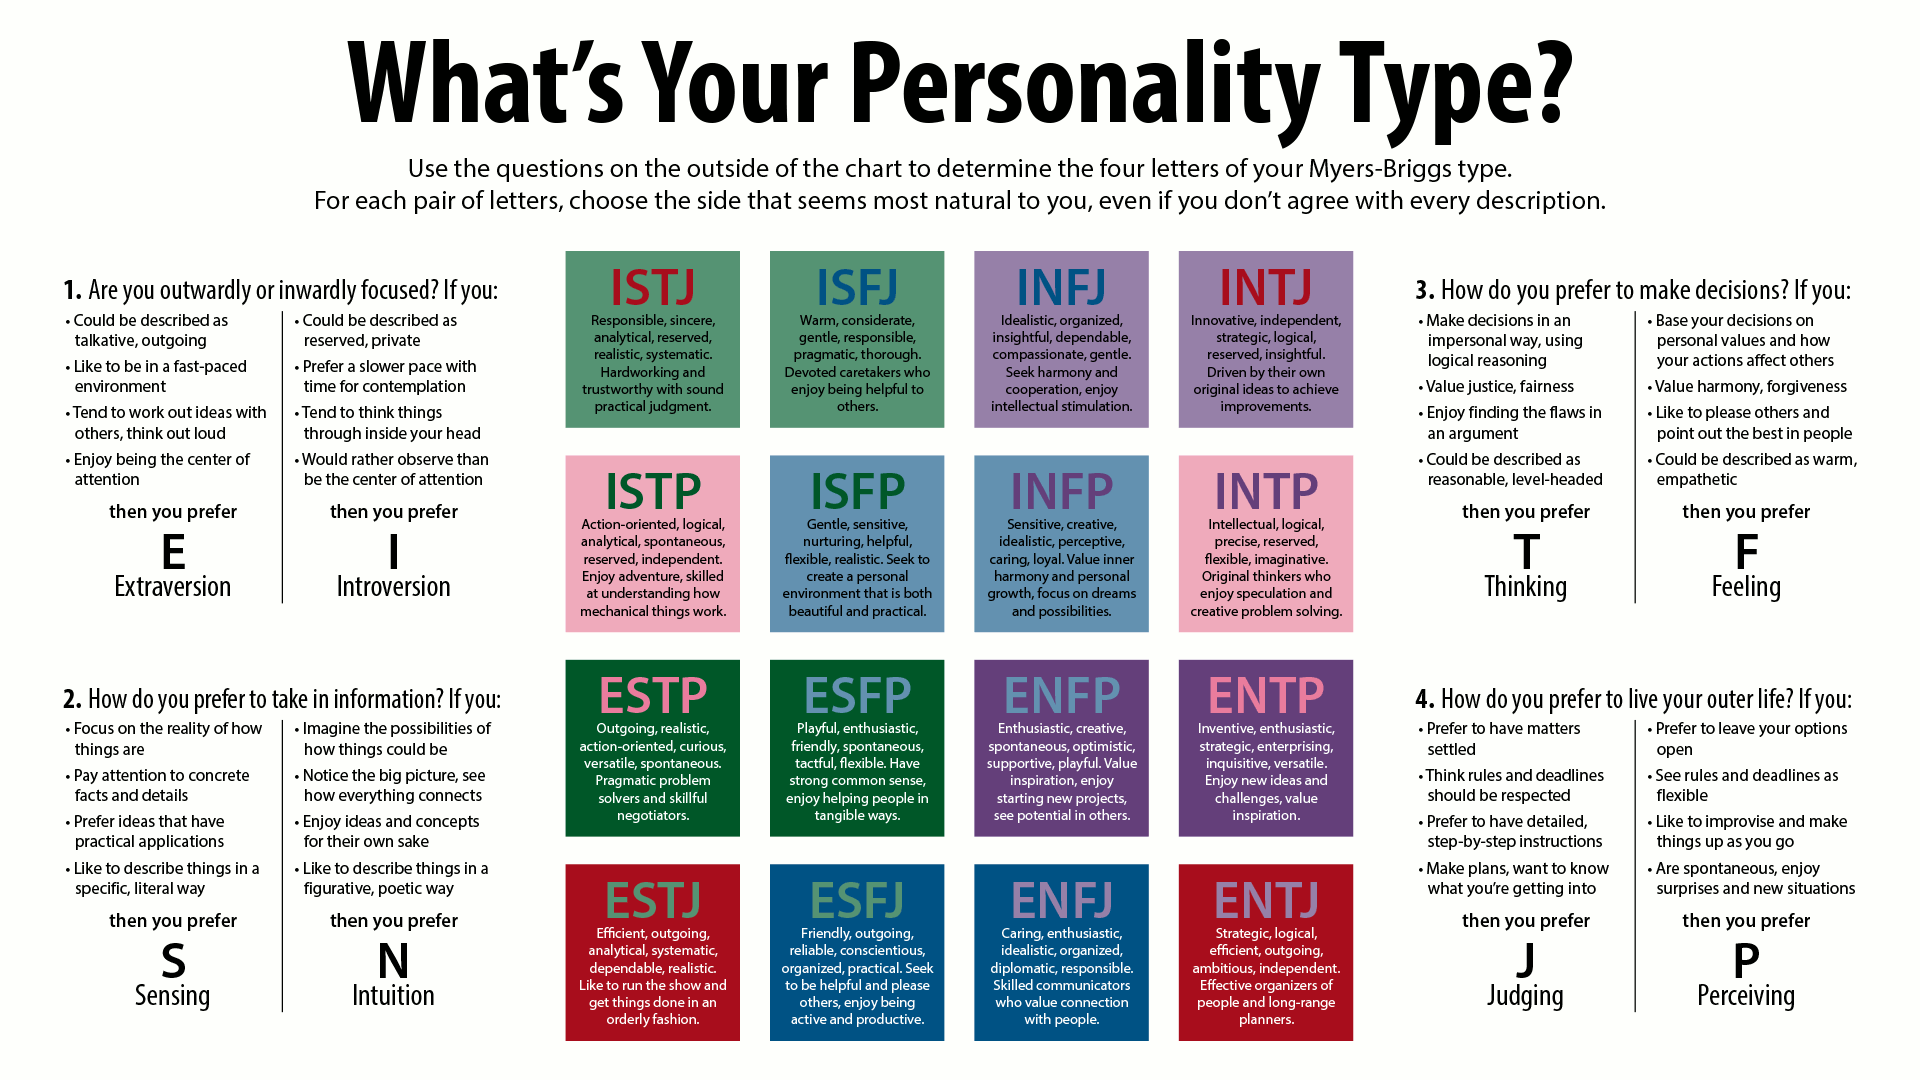 16 Personality Descriptions based on Myers & Briggs Theory